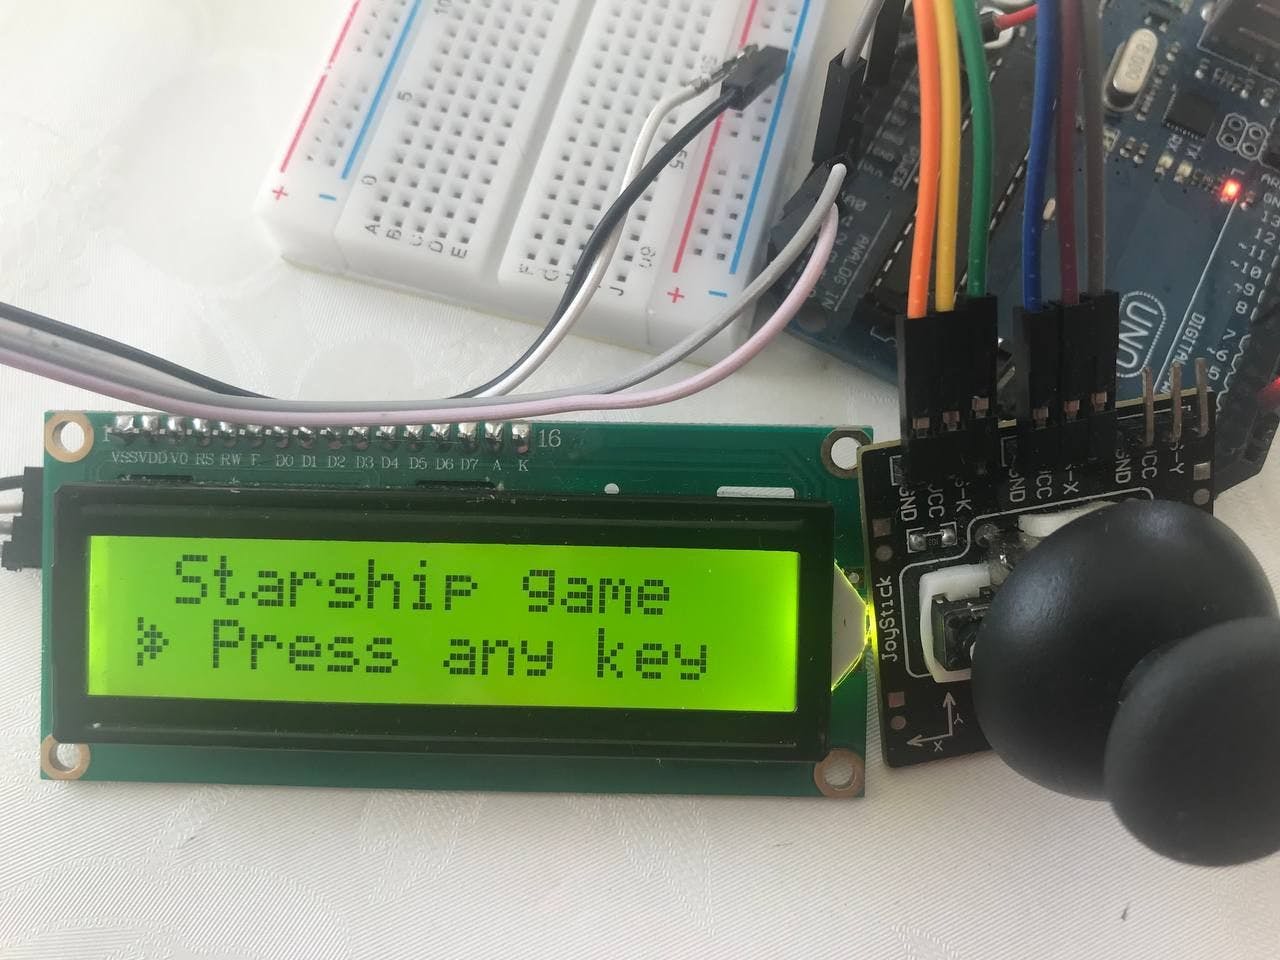 featured image - How to Build an Arduino Starship Game Controlled by Joystick and Computer